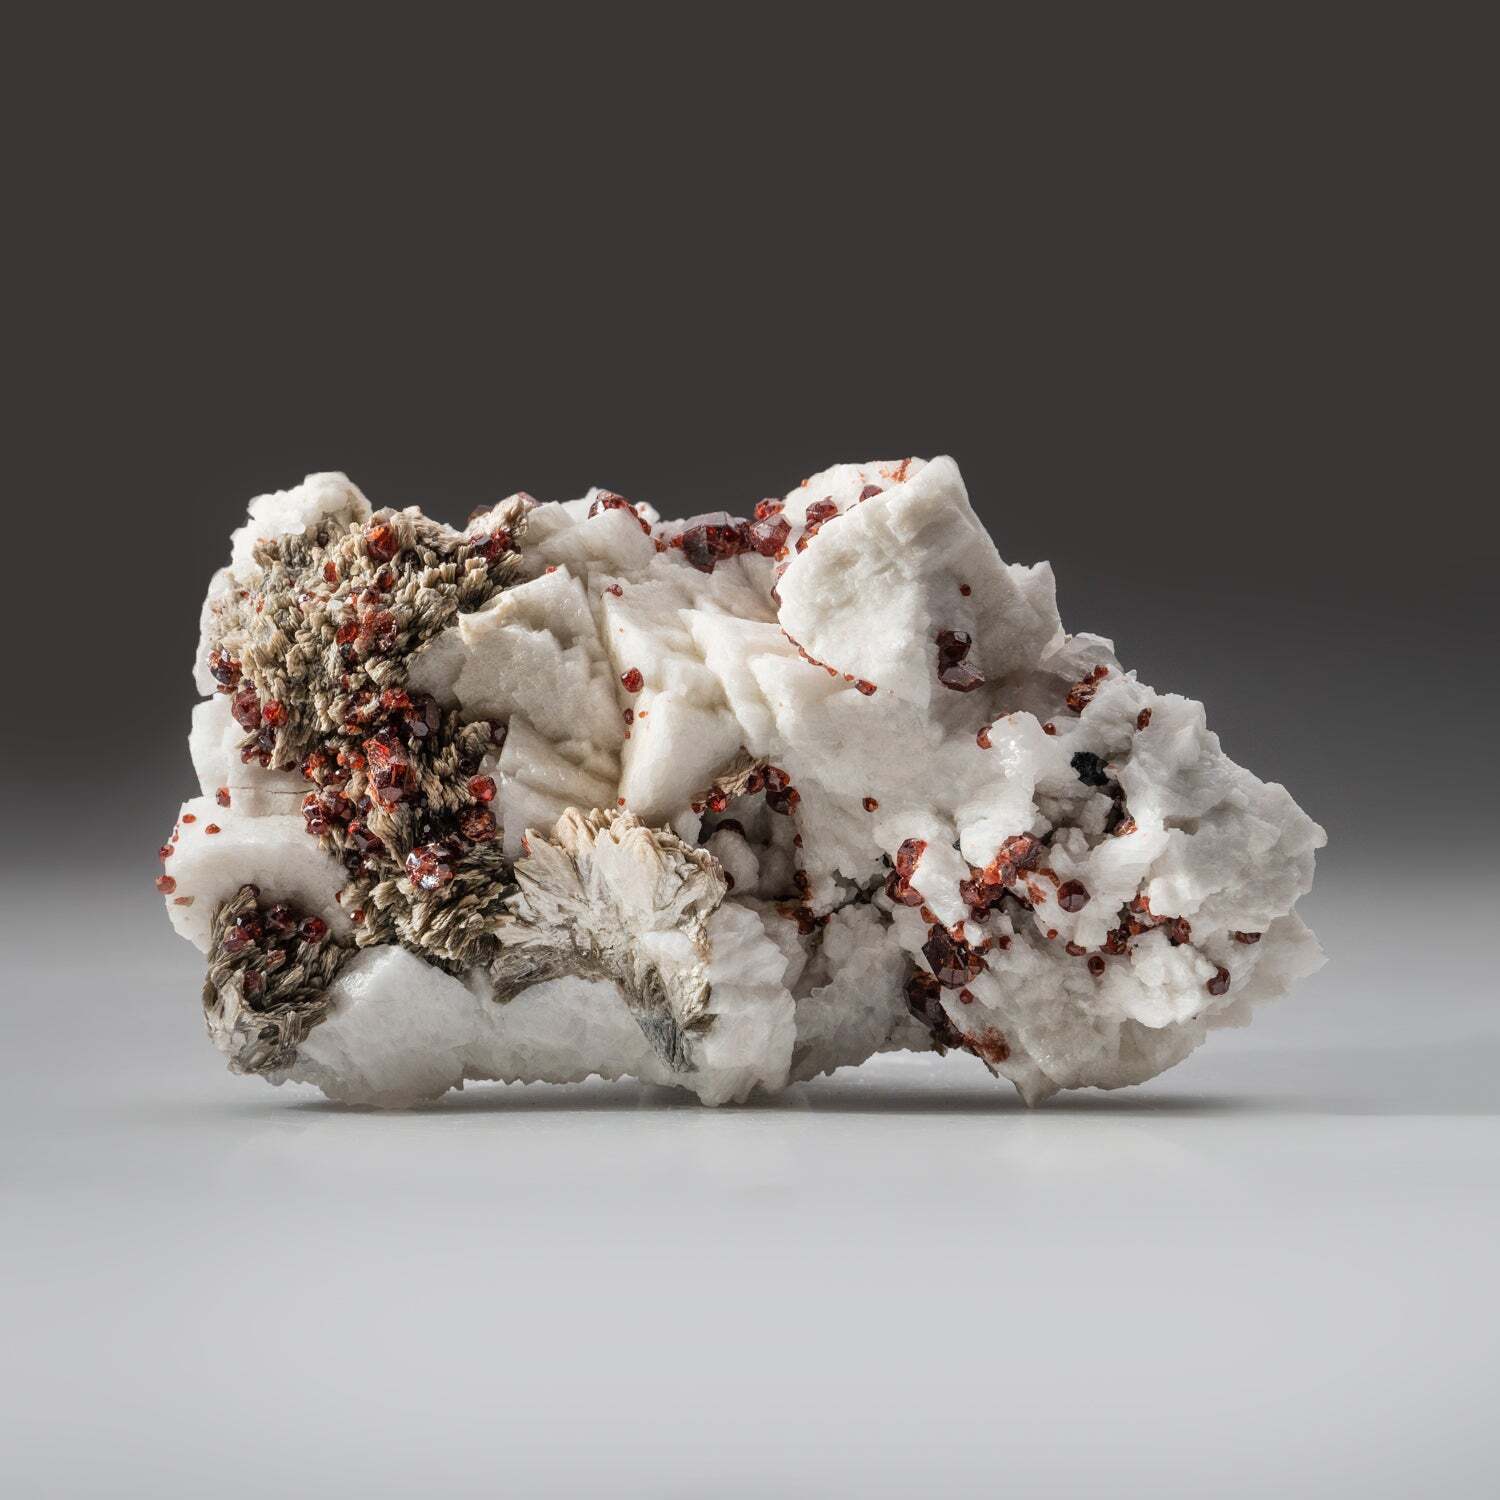 Red Garnet with Muscovite on Albite Matrix from Fujian Province, China